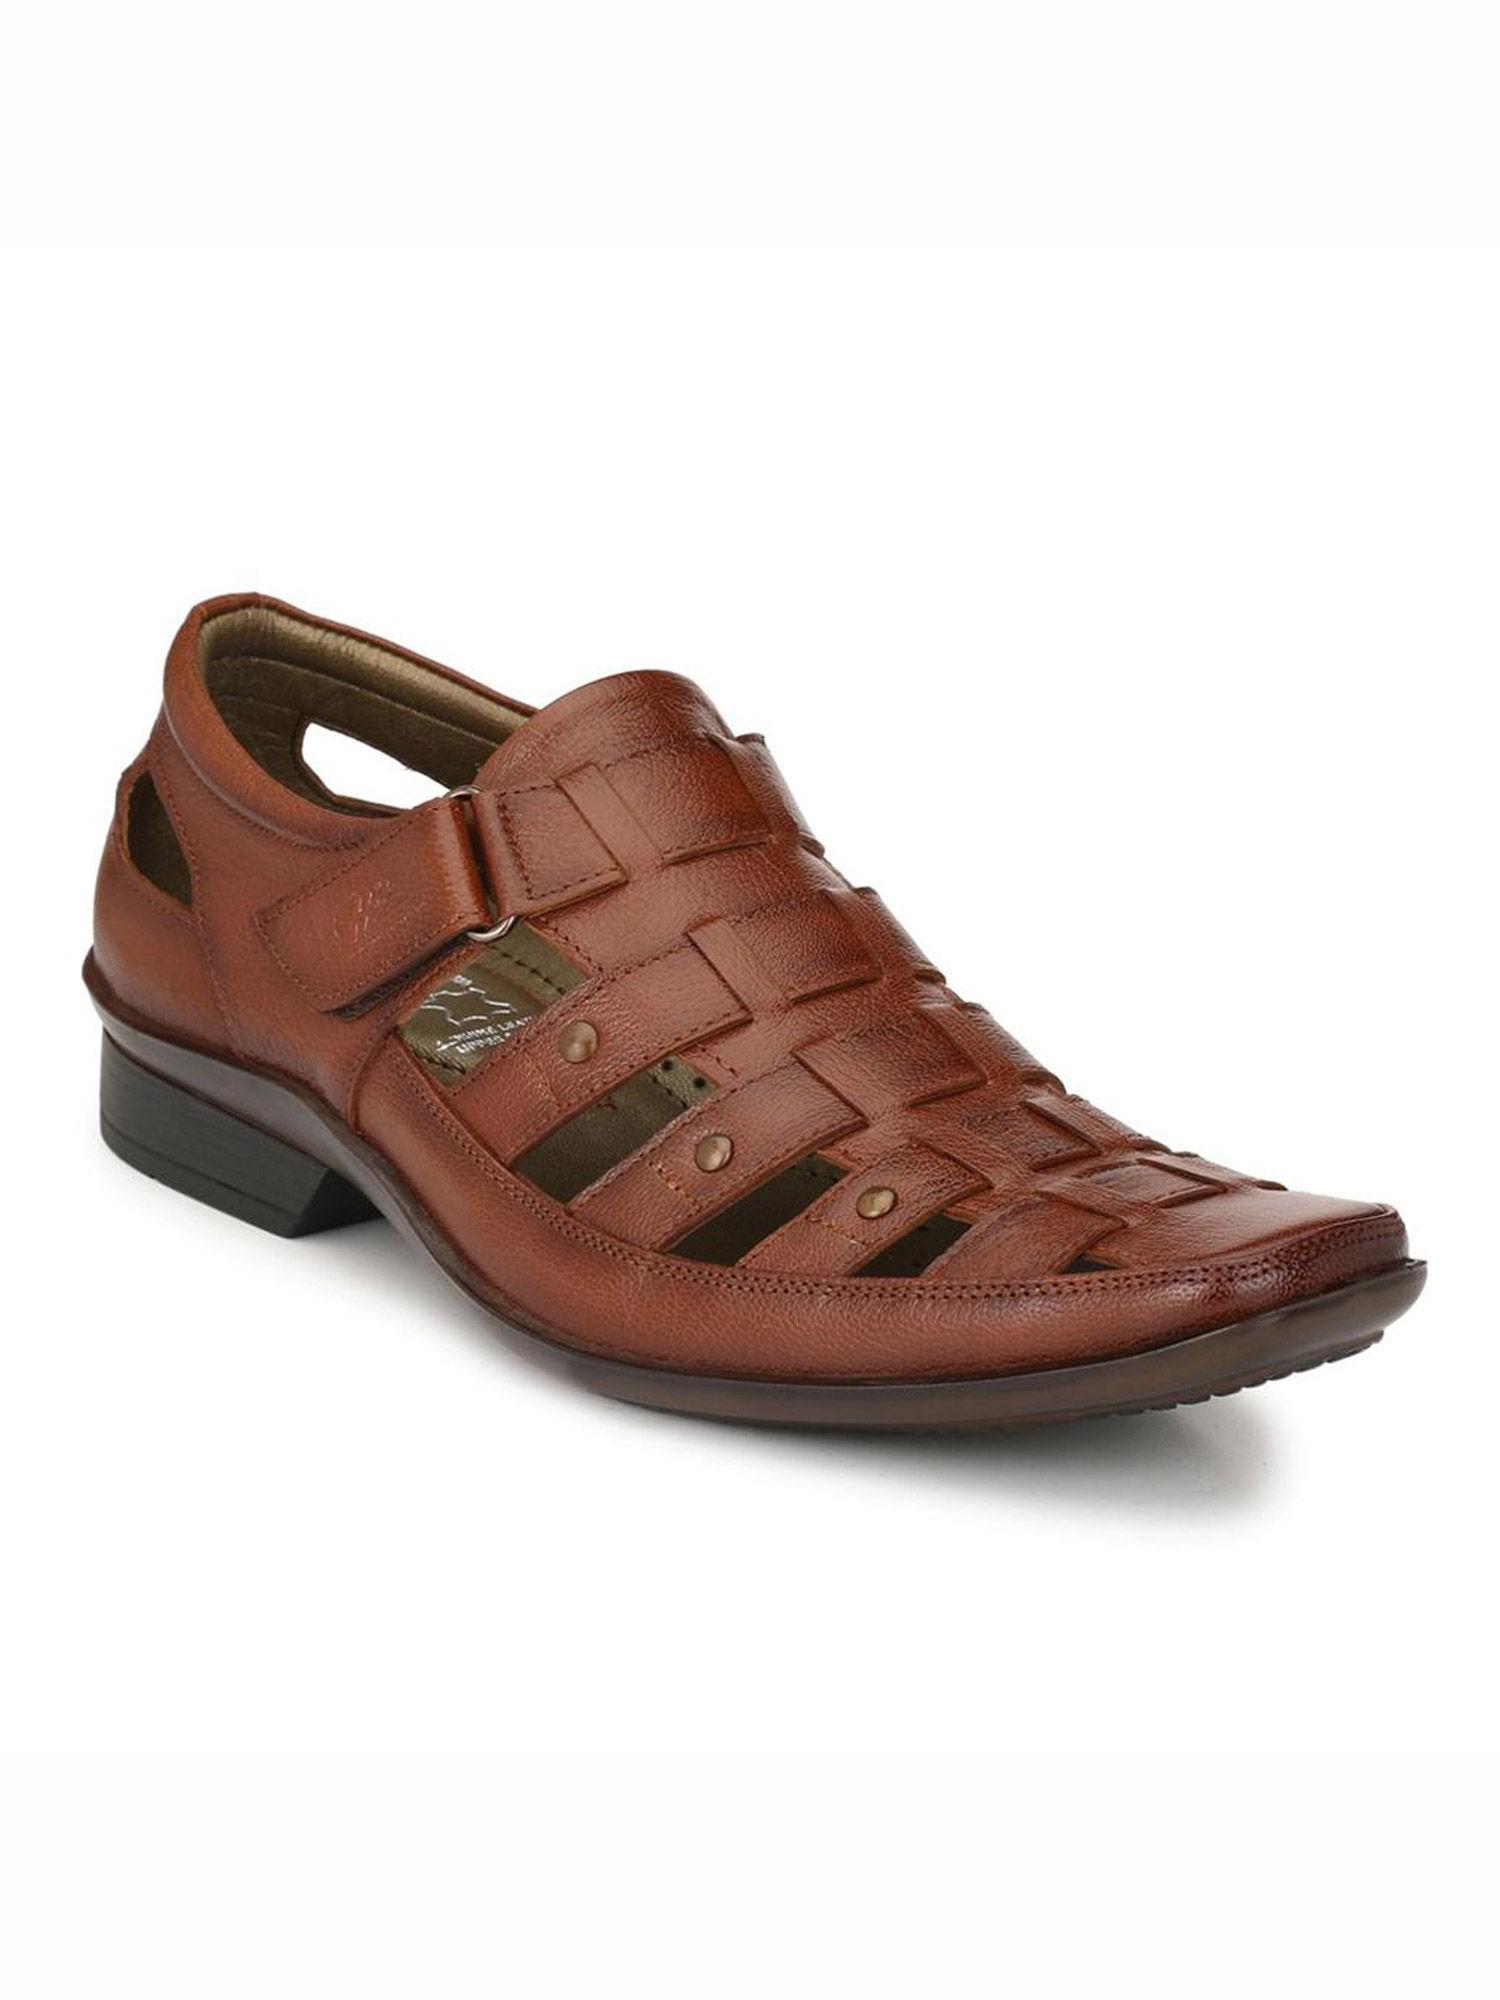 men's tan leather shoe-style sandals with velcro